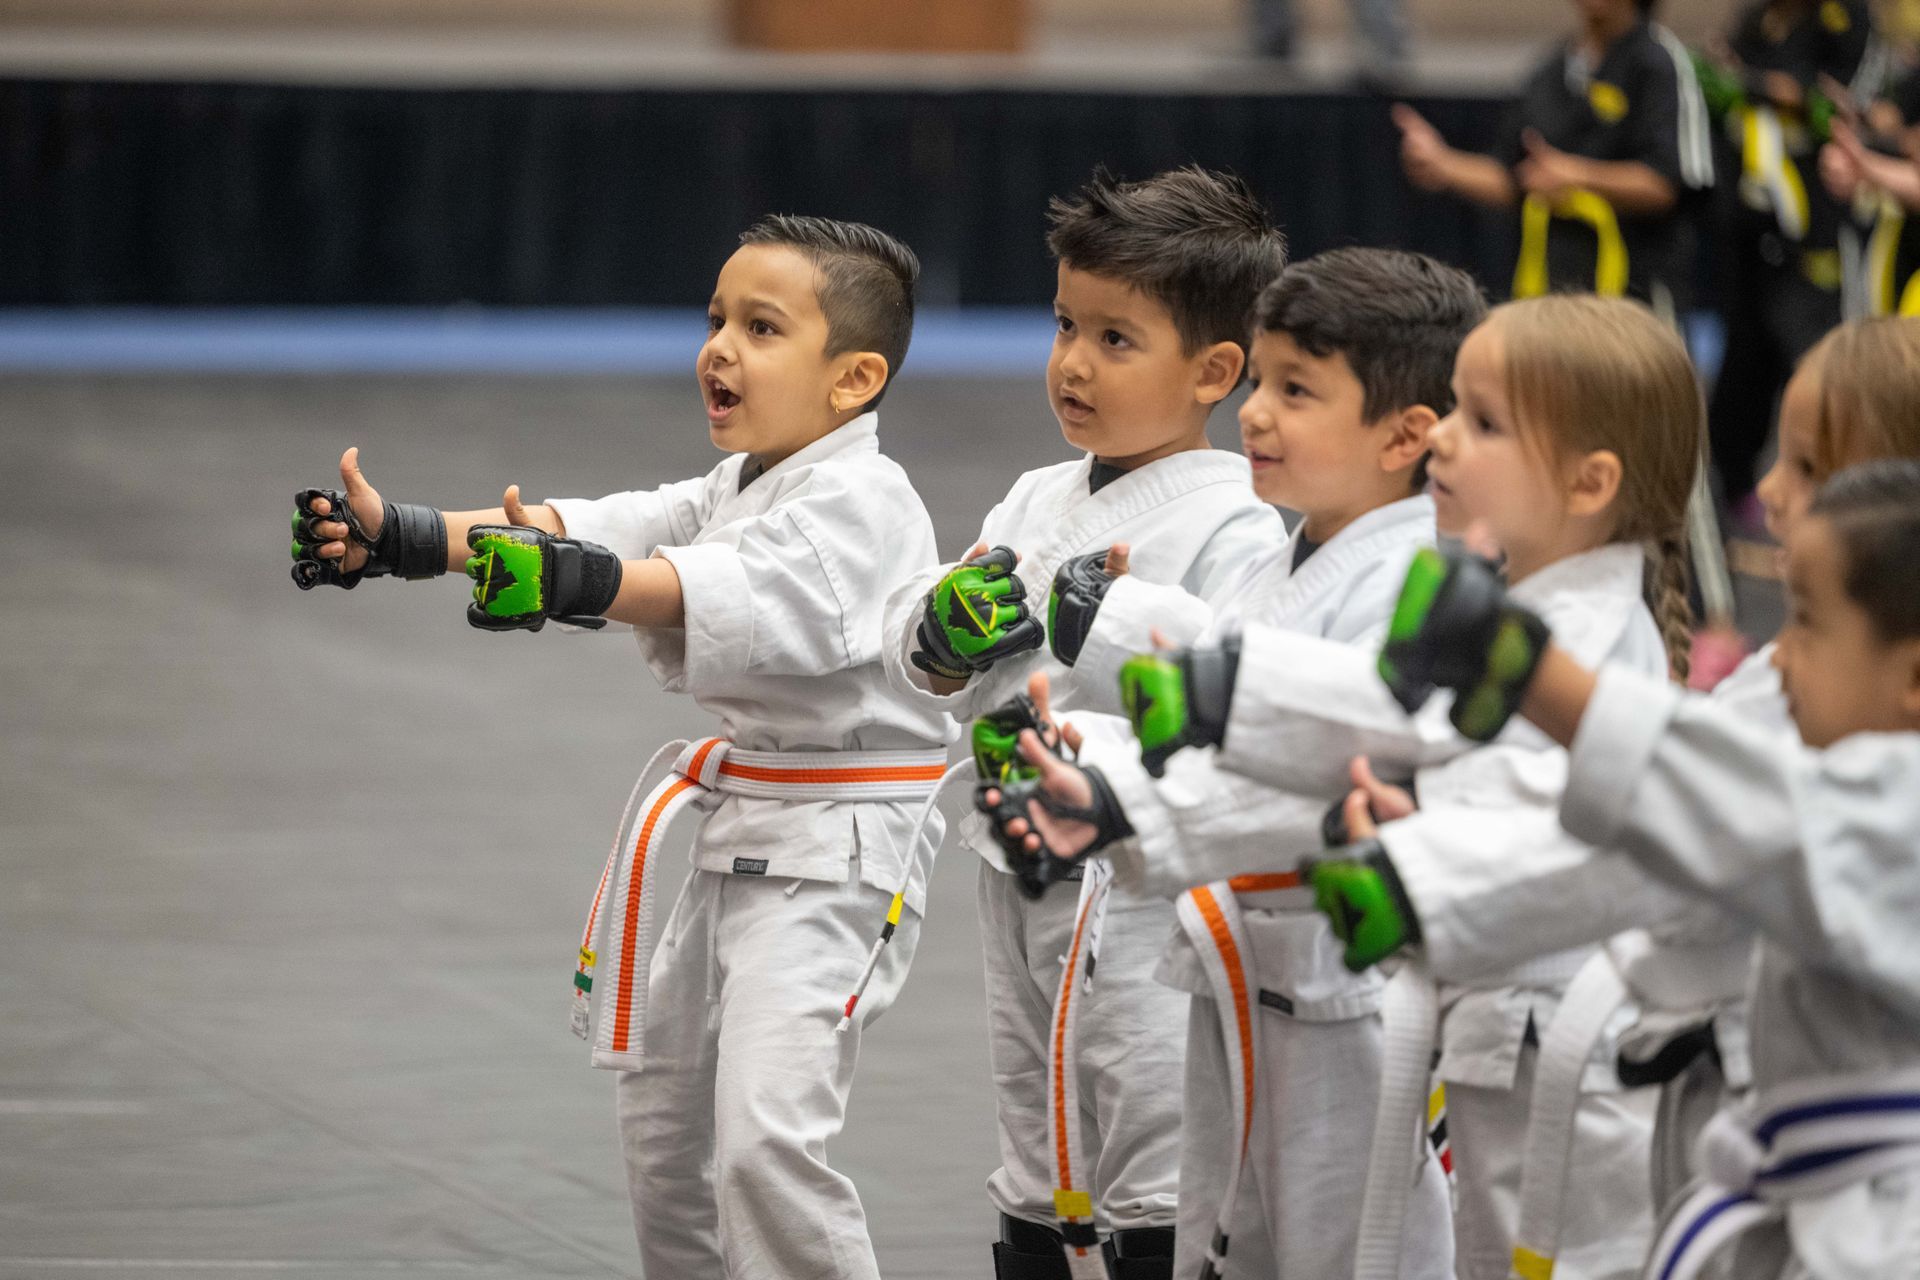 a group of young children are practicing martial arts in a gym .